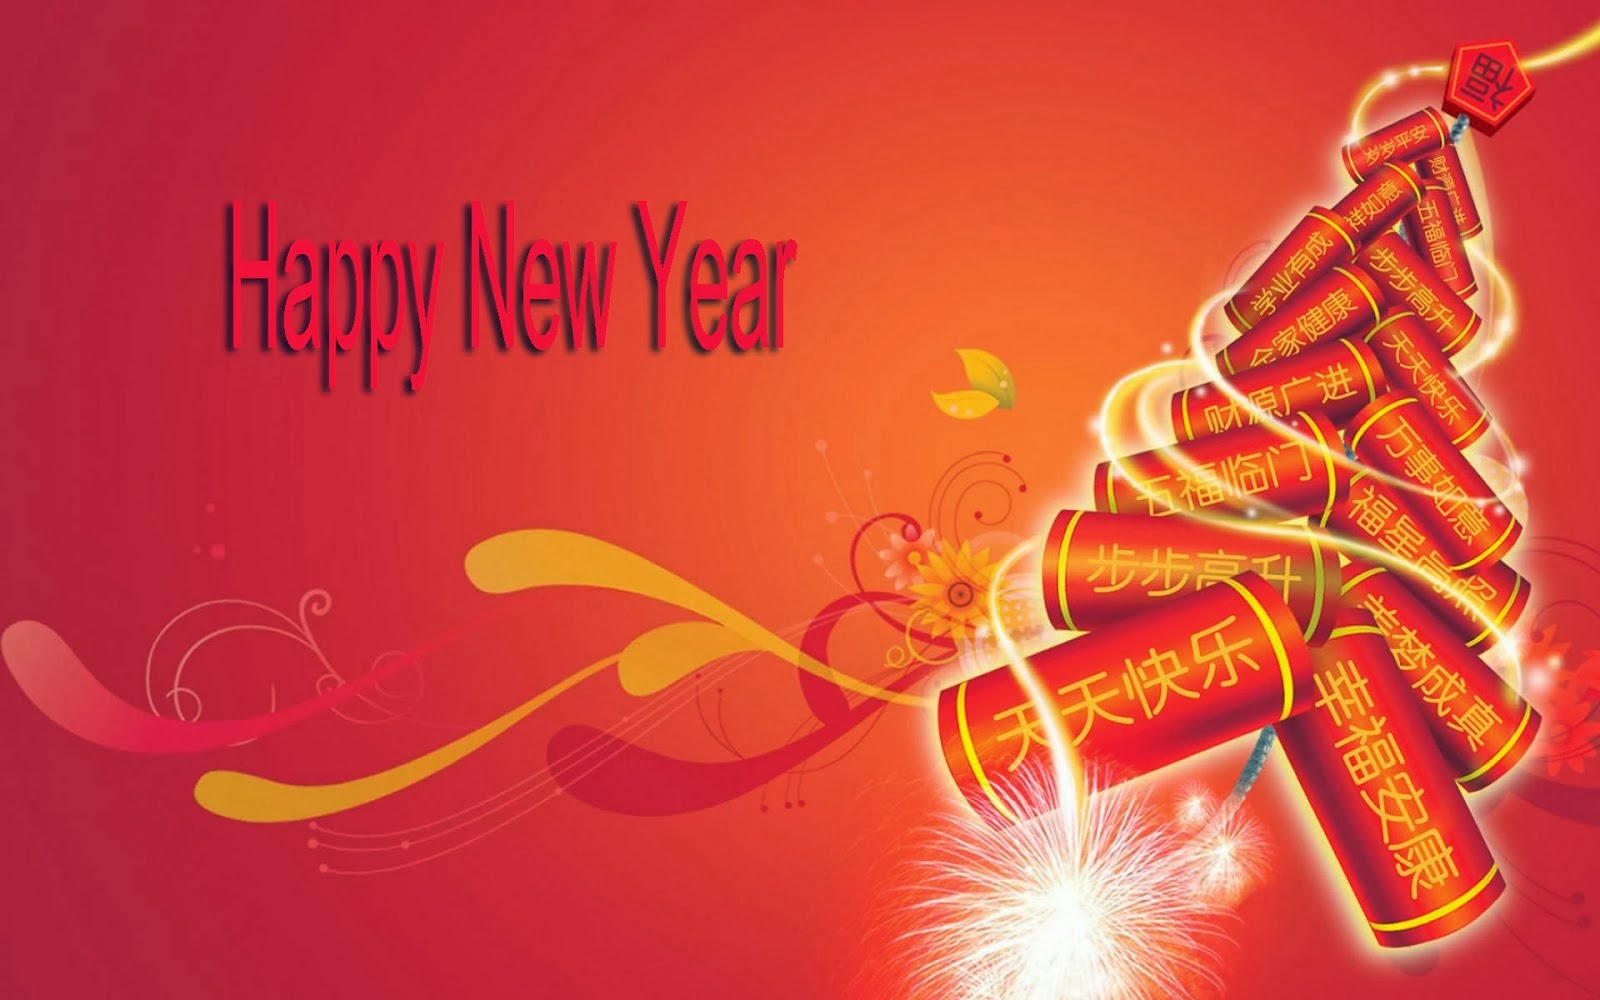 Chinese New Year 2014 HD Wallpaper Image For Your PC Desktop